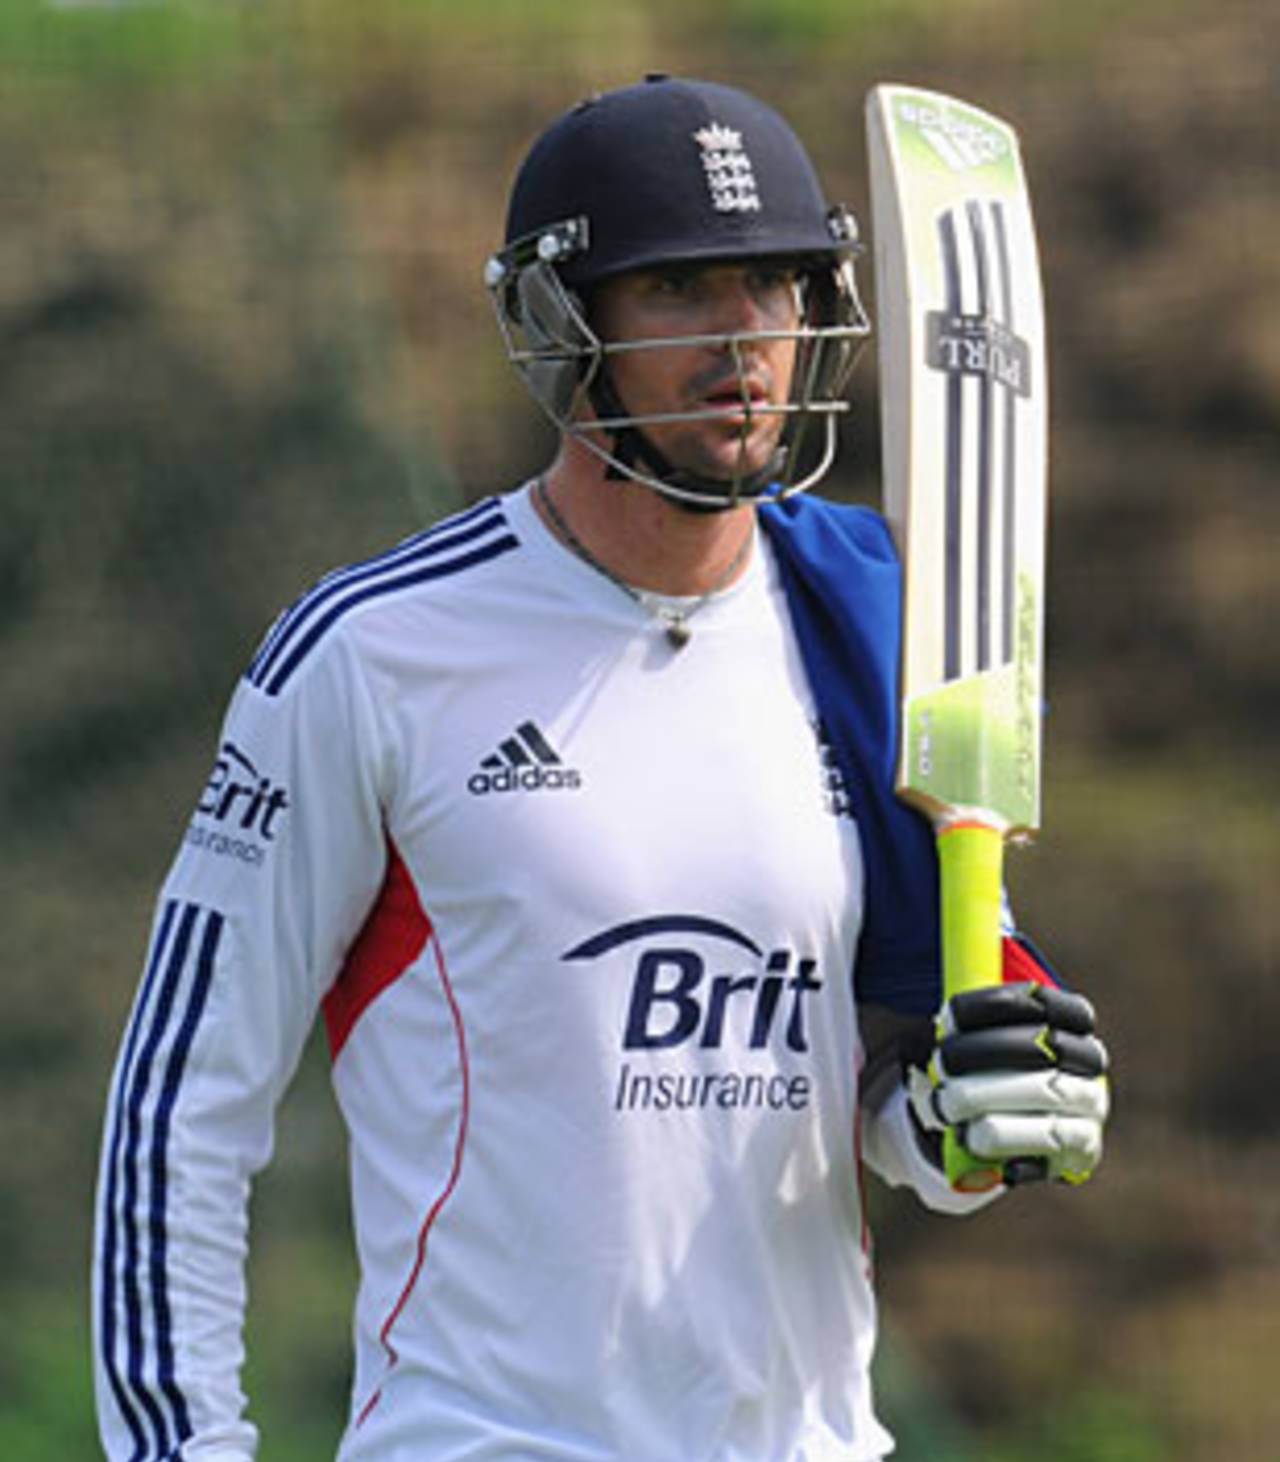 Kevin Pietersen heads to the nets, Chester-le-Street, August 7, 2013